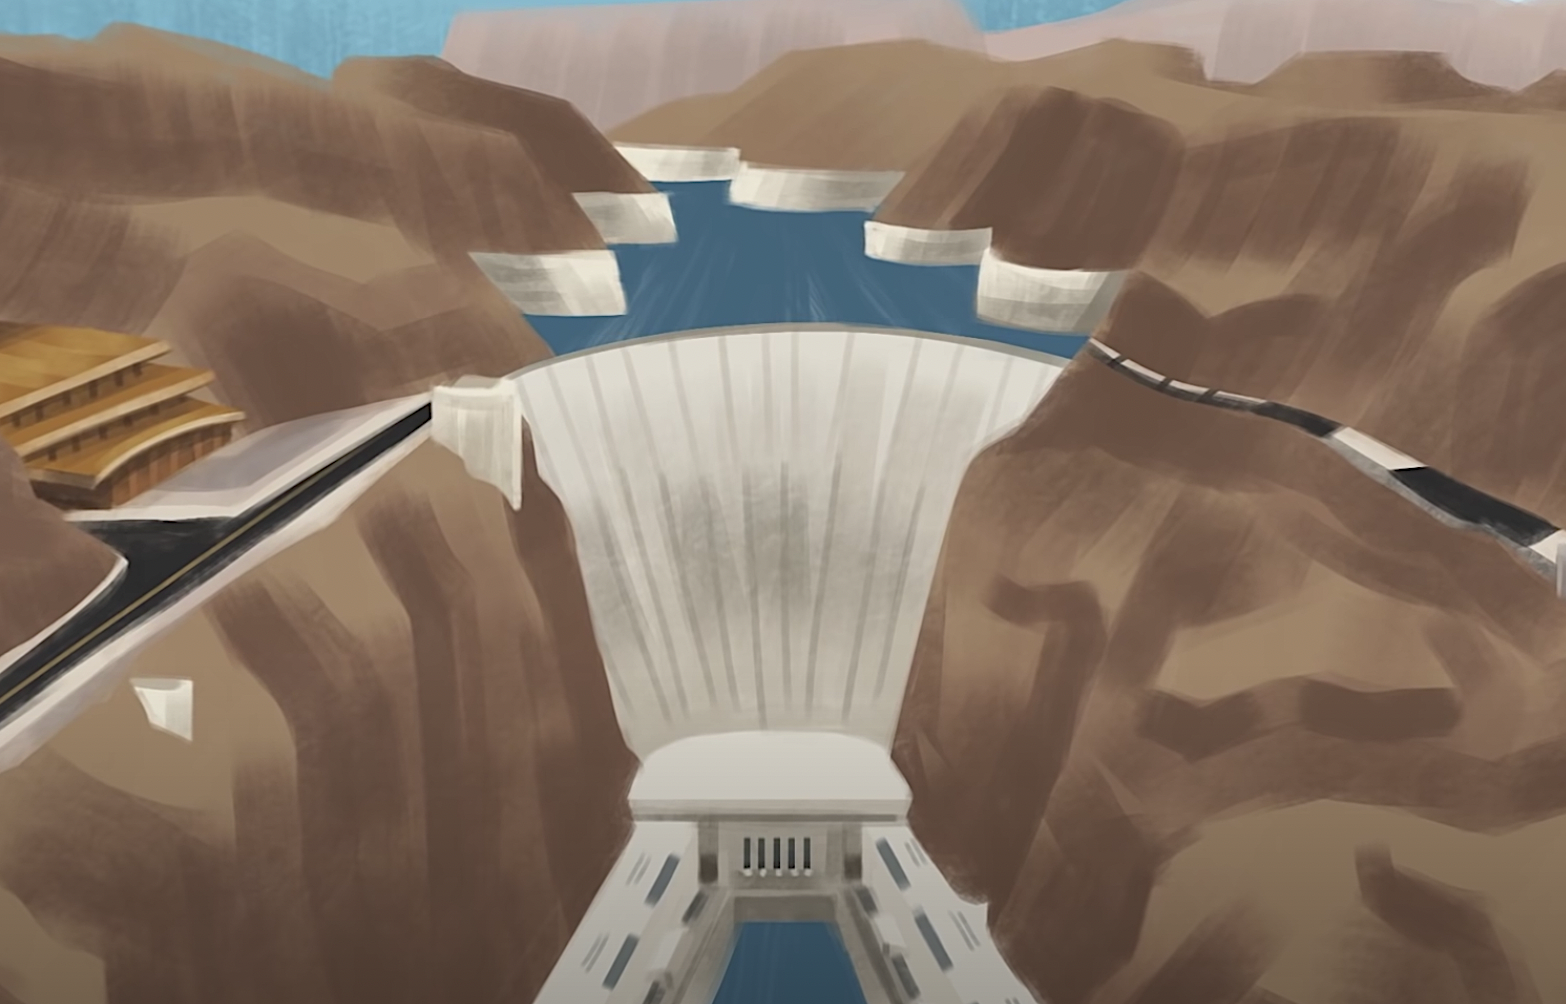 Why Was the Hoover Dam Built?